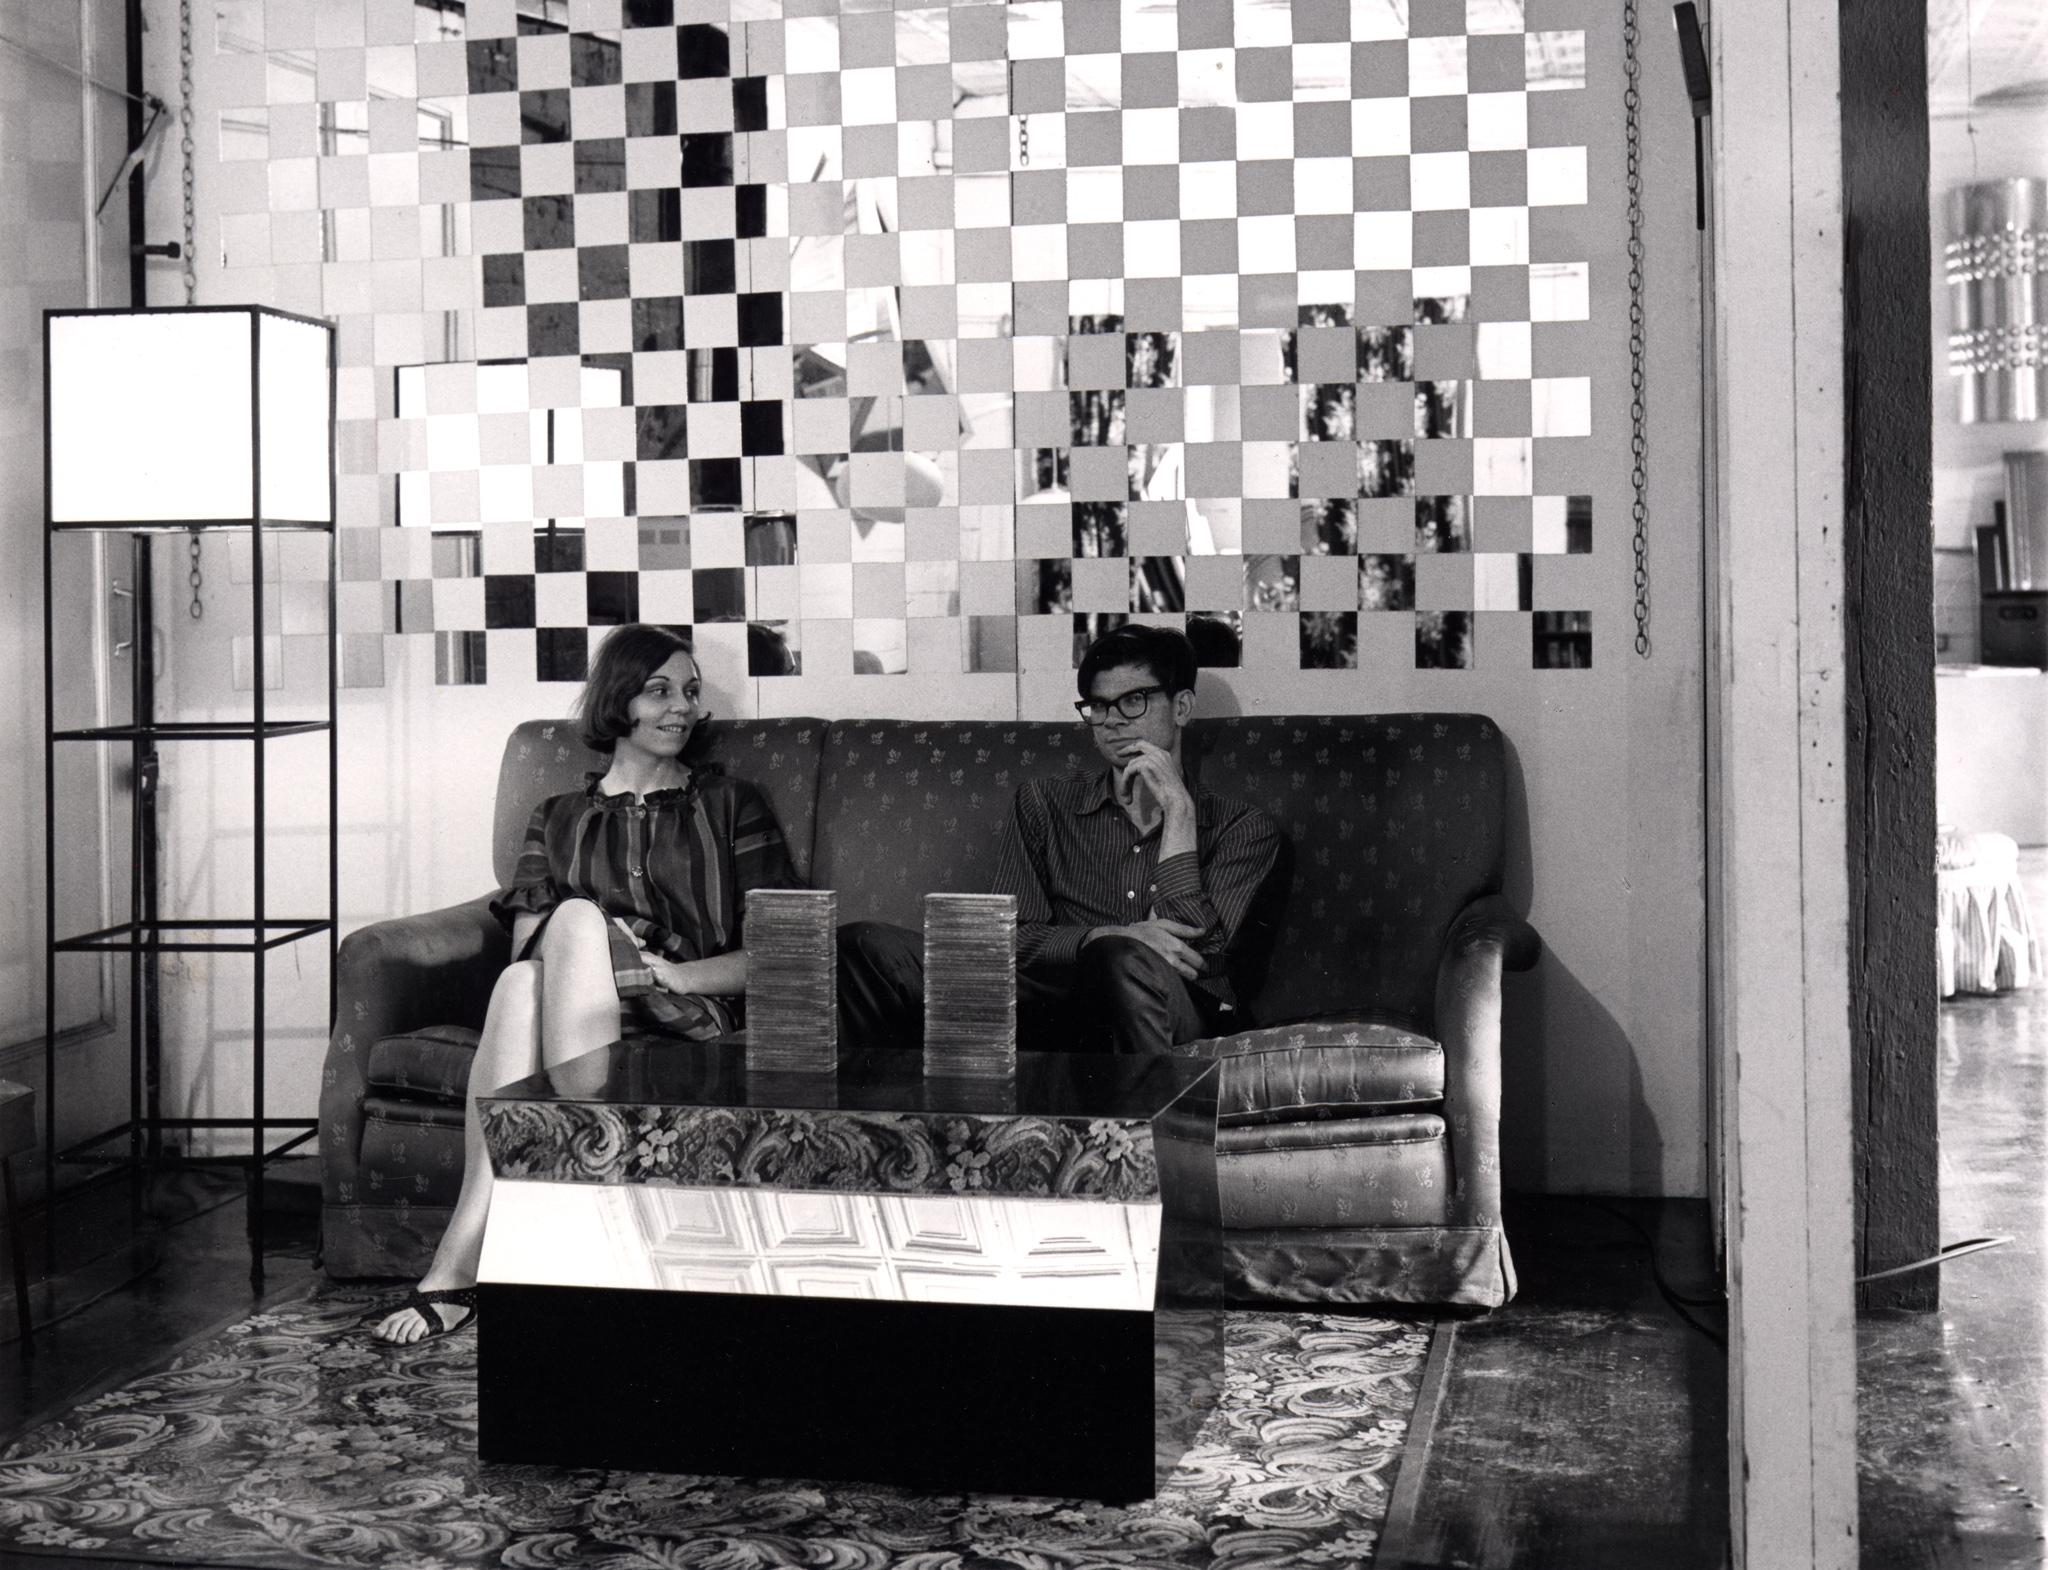 two people sitting on a couch with a mirrored wall behind them and a mirrored coffee table in front of them